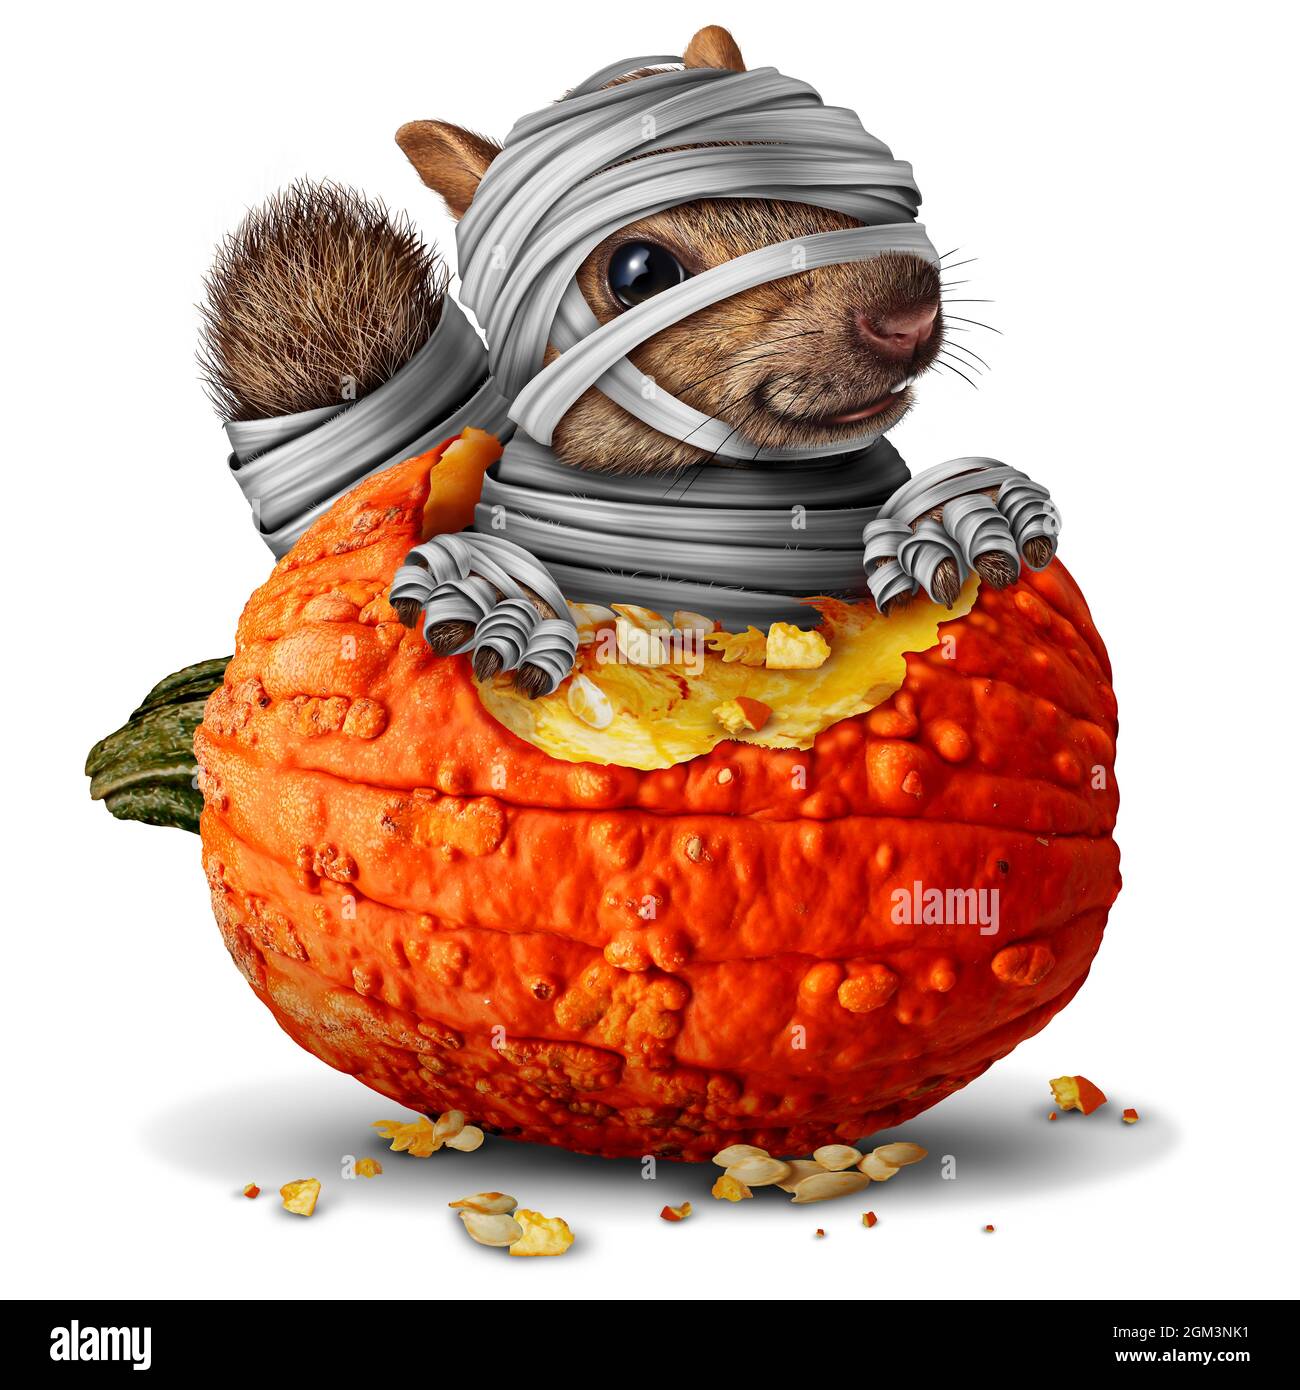 Mummy squirrel and cute Zombie squirrels fall season symbol as a halloween animal  eating an orange autumn pumpkin in a 3D illustration style on a w Stock Photo